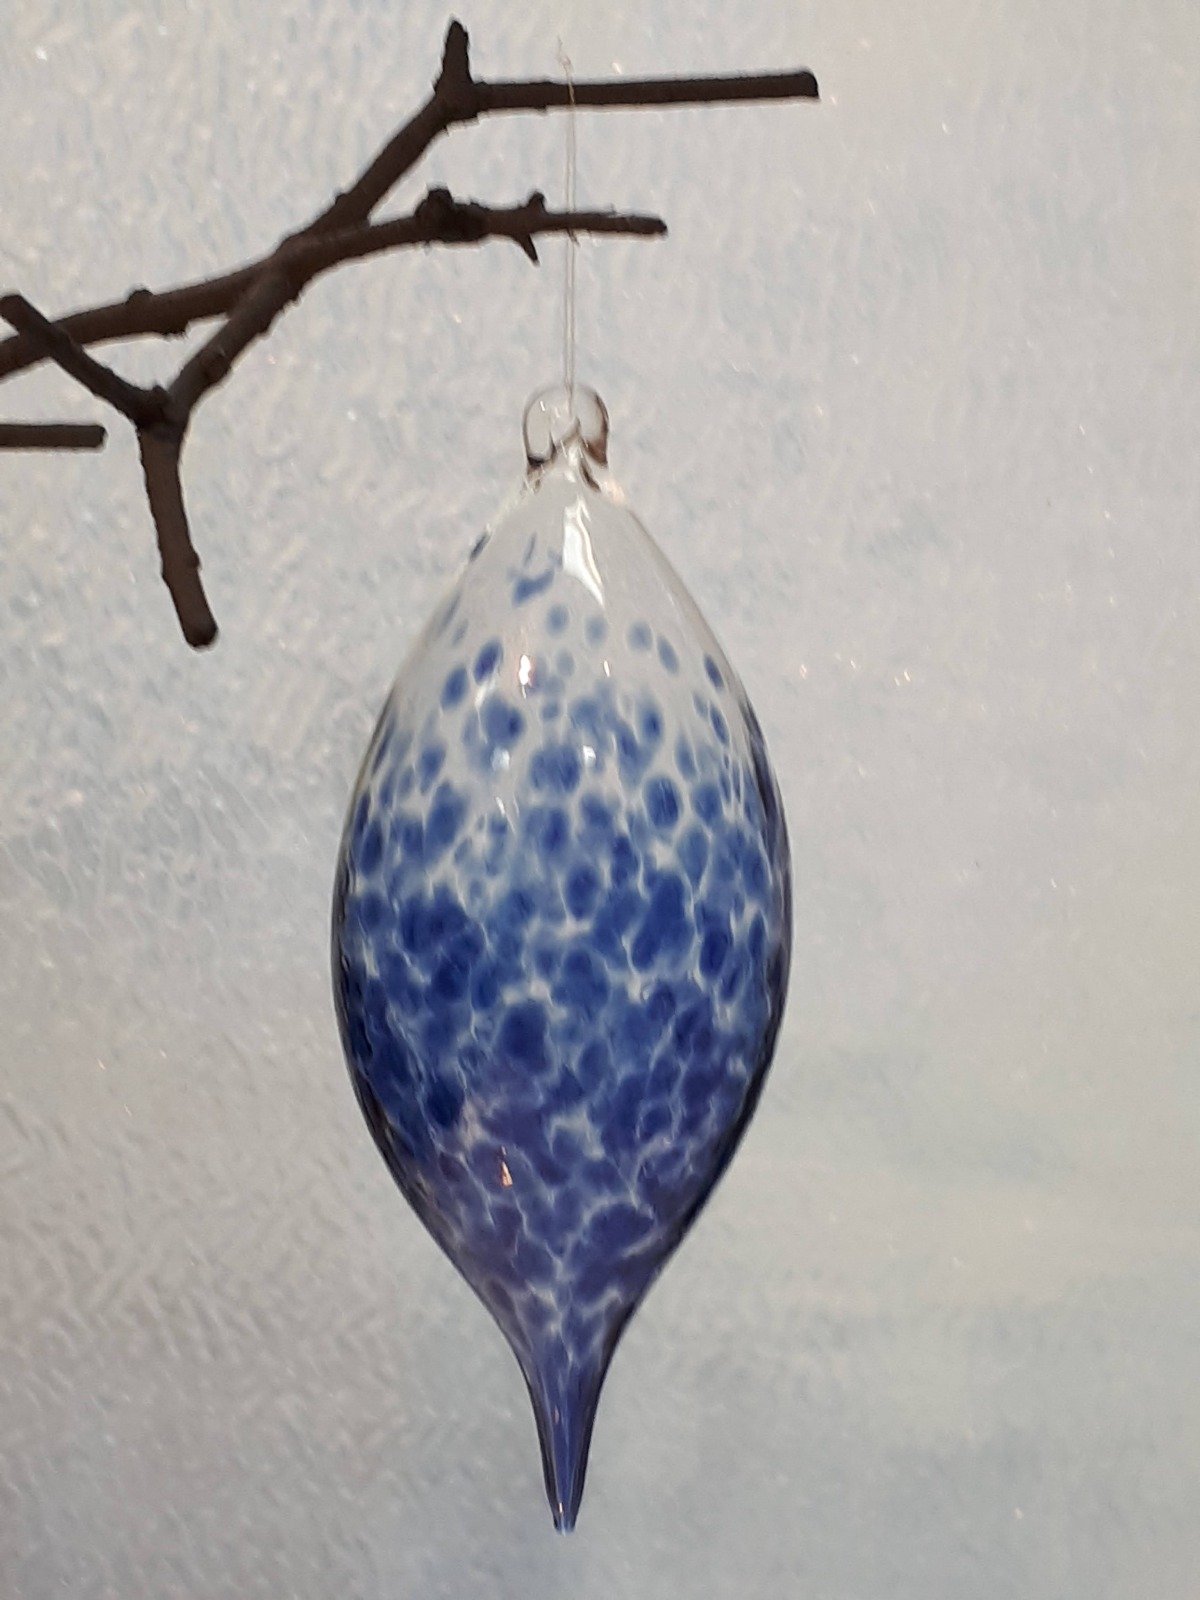 Flameworked Glass Ornament